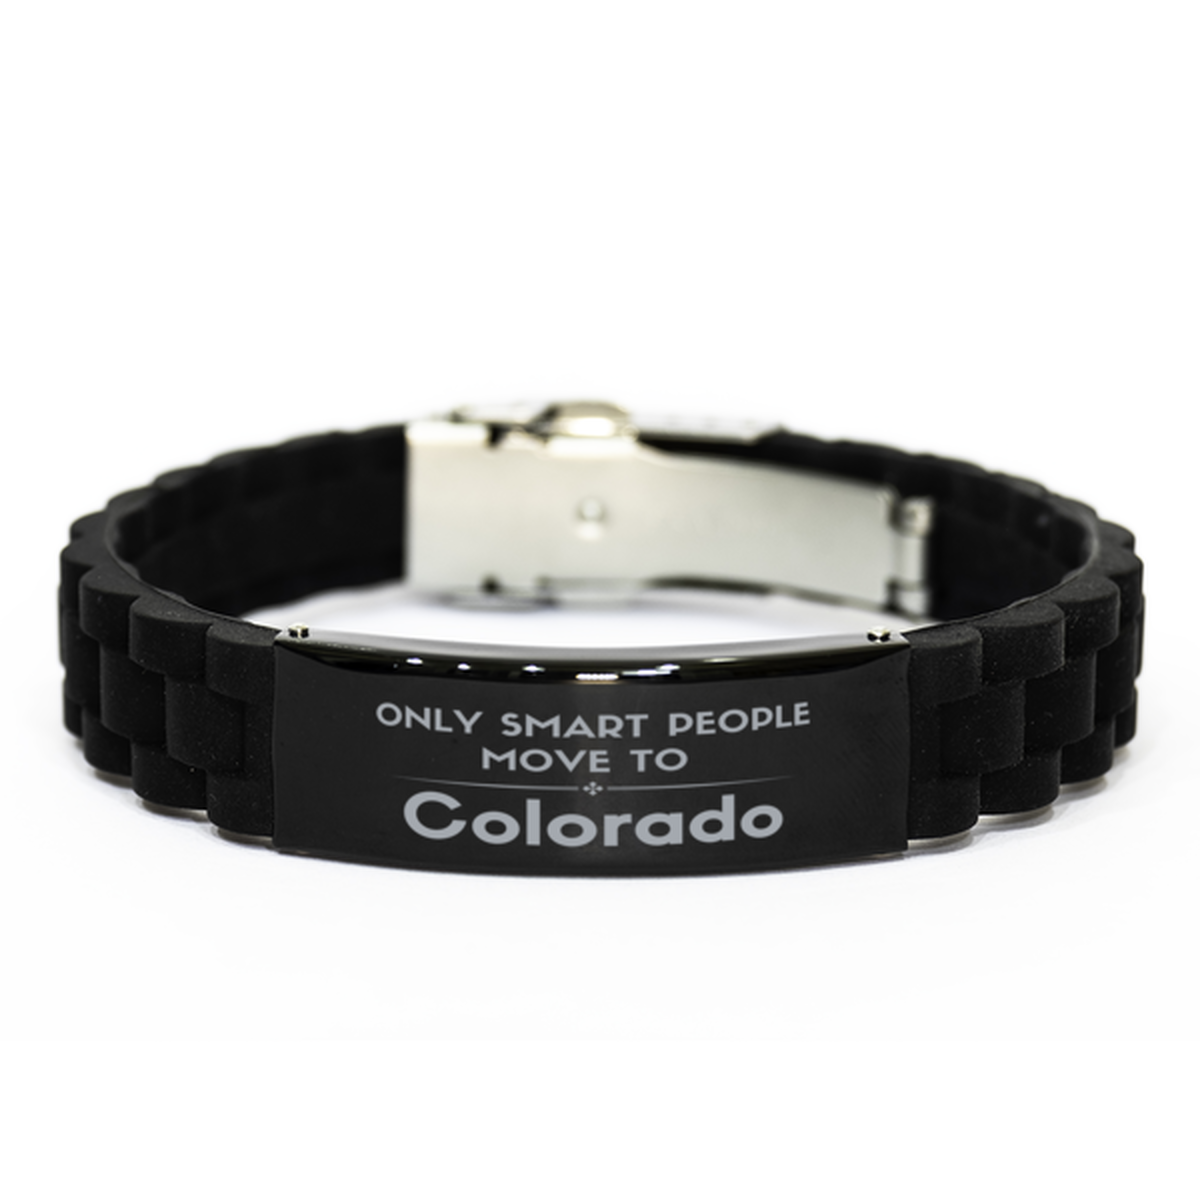 Only smart people move to Colorado Black Glidelock Clasp Bracelet, Gag Gifts For Colorado, Move to Colorado Gifts for Friends Coworker Funny Saying Quote